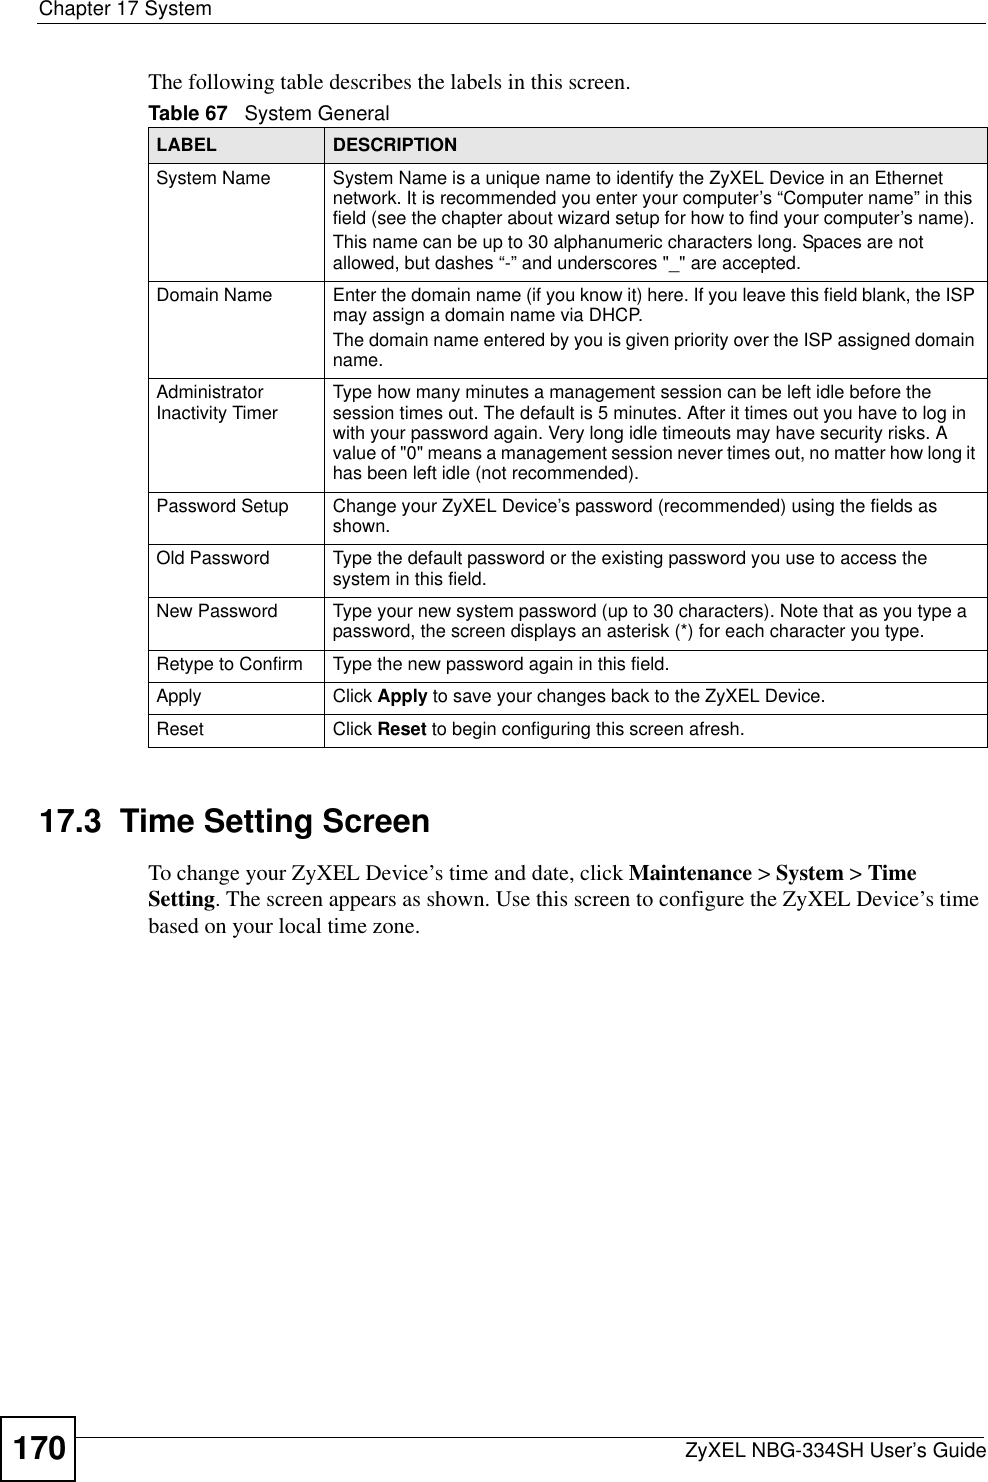 Chapter 17 SystemZyXEL NBG-334SH User’s Guide170The following table describes the labels in this screen.17.3  Time Setting ScreenTo change your ZyXEL Device’s time and date, click Maintenance &gt; System &gt; Time Setting. The screen appears as shown. Use this screen to configure the ZyXEL Device’s time based on your local time zone.Table 67   System GeneralLABEL DESCRIPTIONSystem Name System Name is a unique name to identify the ZyXEL Device in an Ethernet network. It is recommended you enter your computer’s “Computer name” in this field (see the chapter about wizard setup for how to find your computer’s name). This name can be up to 30 alphanumeric characters long. Spaces are not allowed, but dashes “-” and underscores &quot;_&quot; are accepted.Domain Name Enter the domain name (if you know it) here. If you leave this field blank, the ISP may assign a domain name via DHCP. The domain name entered by you is given priority over the ISP assigned domain name.Administrator Inactivity Timer Type how many minutes a management session can be left idle before the session times out. The default is 5 minutes. After it times out you have to log in with your password again. Very long idle timeouts may have security risks. A value of &quot;0&quot; means a management session never times out, no matter how long it has been left idle (not recommended).Password Setup Change your ZyXEL Device’s password (recommended) using the fields as shown.Old Password Type the default password or the existing password you use to access the system in this field.New Password Type your new system password (up to 30 characters). Note that as you type a password, the screen displays an asterisk (*) for each character you type.Retype to Confirm Type the new password again in this field.Apply Click Apply to save your changes back to the ZyXEL Device.Reset Click Reset to begin configuring this screen afresh.